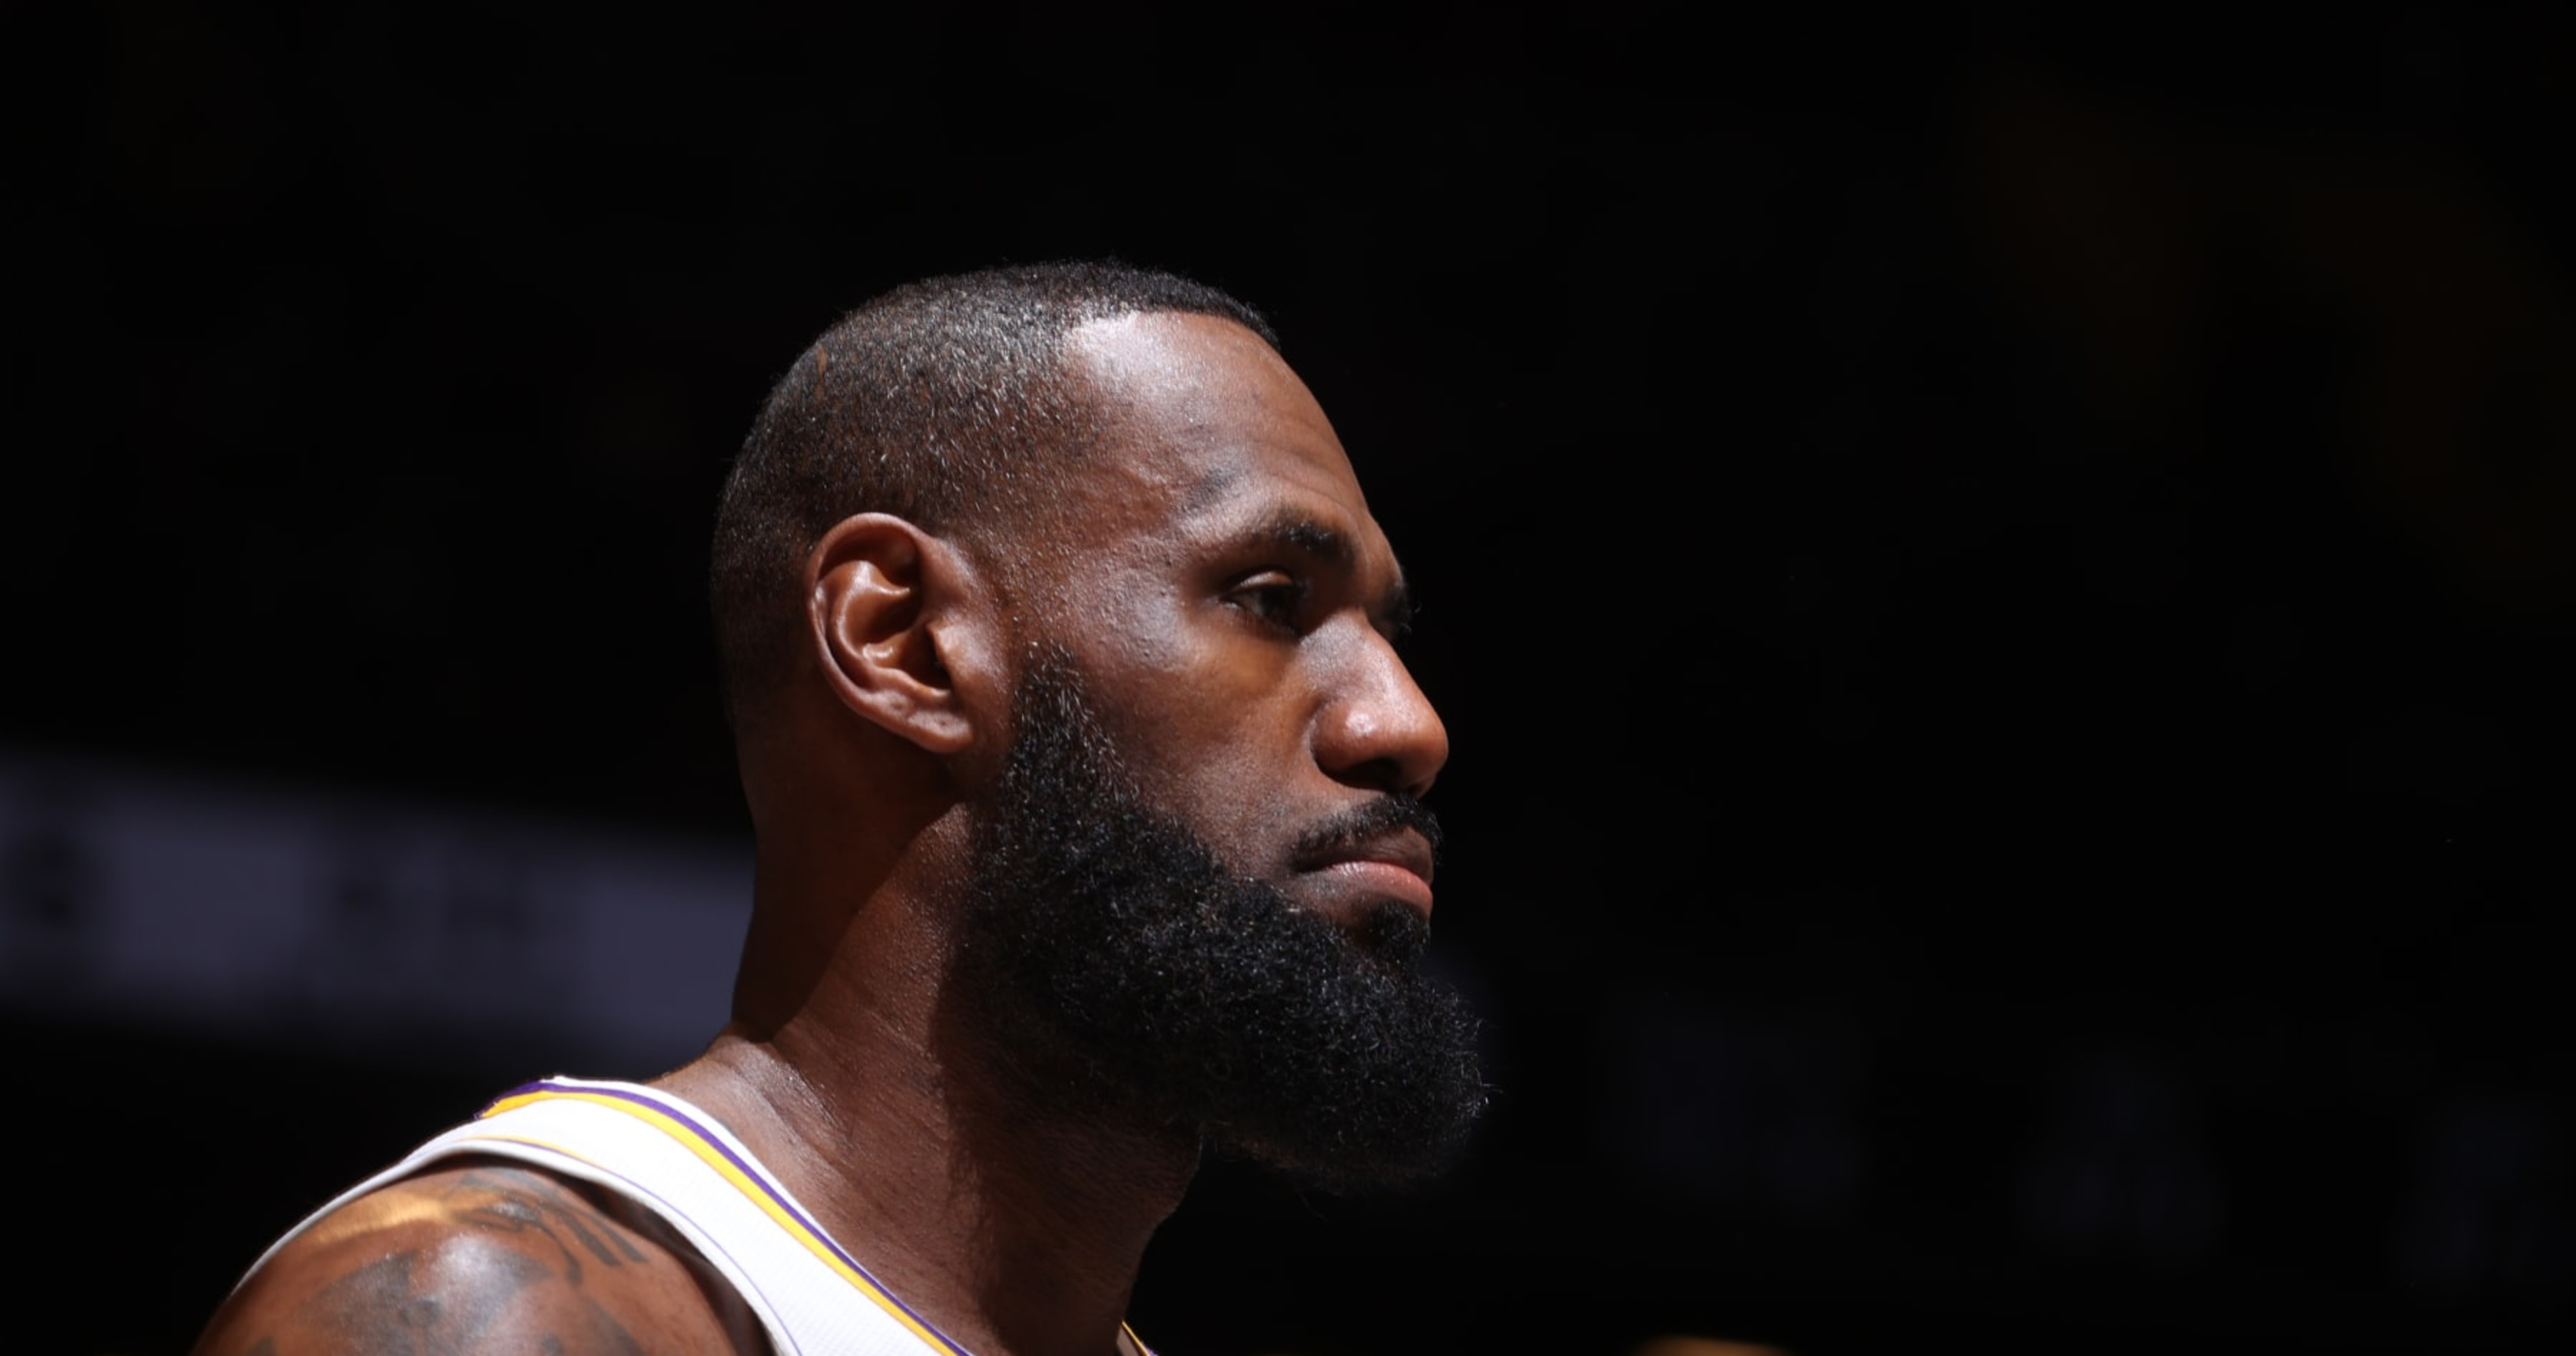 Lakers' LeBron James: Not Sure When I'll Retire But 'I Don't Have Much Time Left'